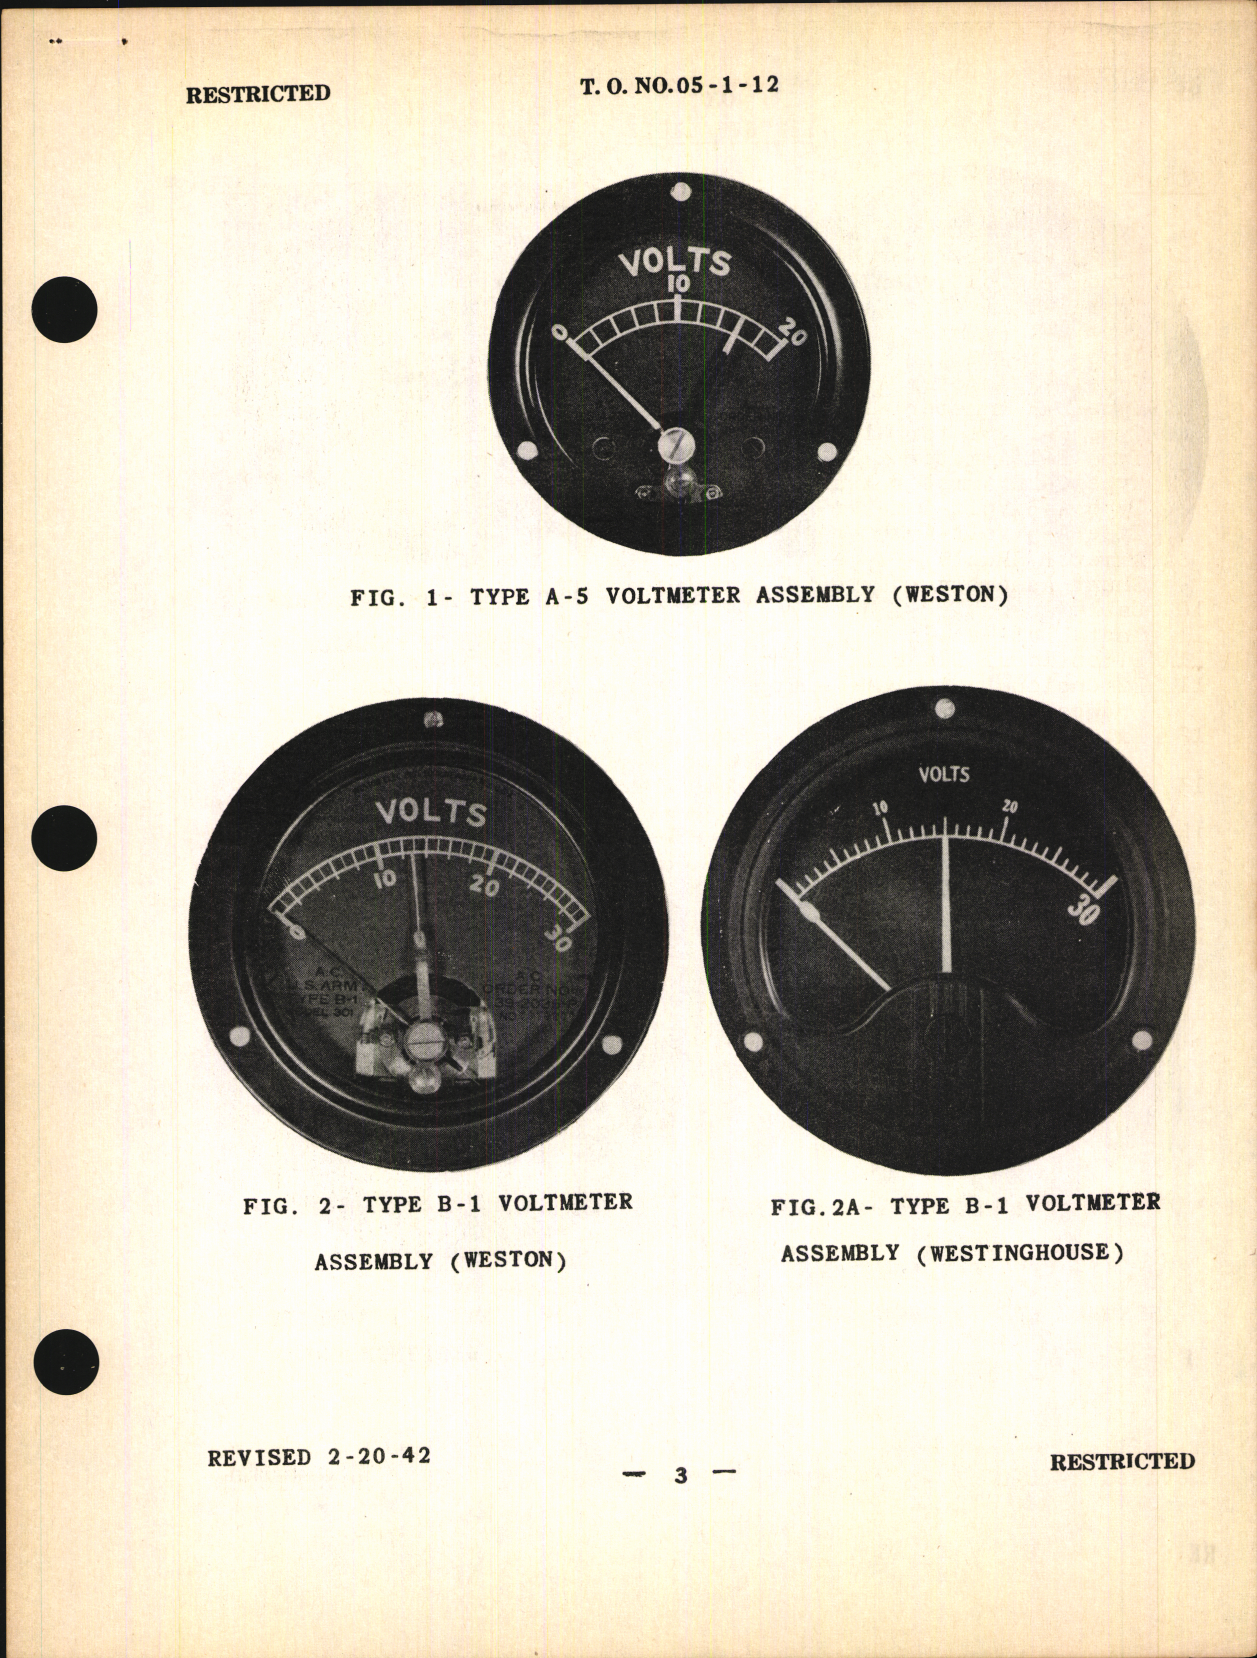 Sample page 5 from AirCorps Library document: Handbook of Service Instructions for Voltmeters, Ammeters, and Volt-Ammeters